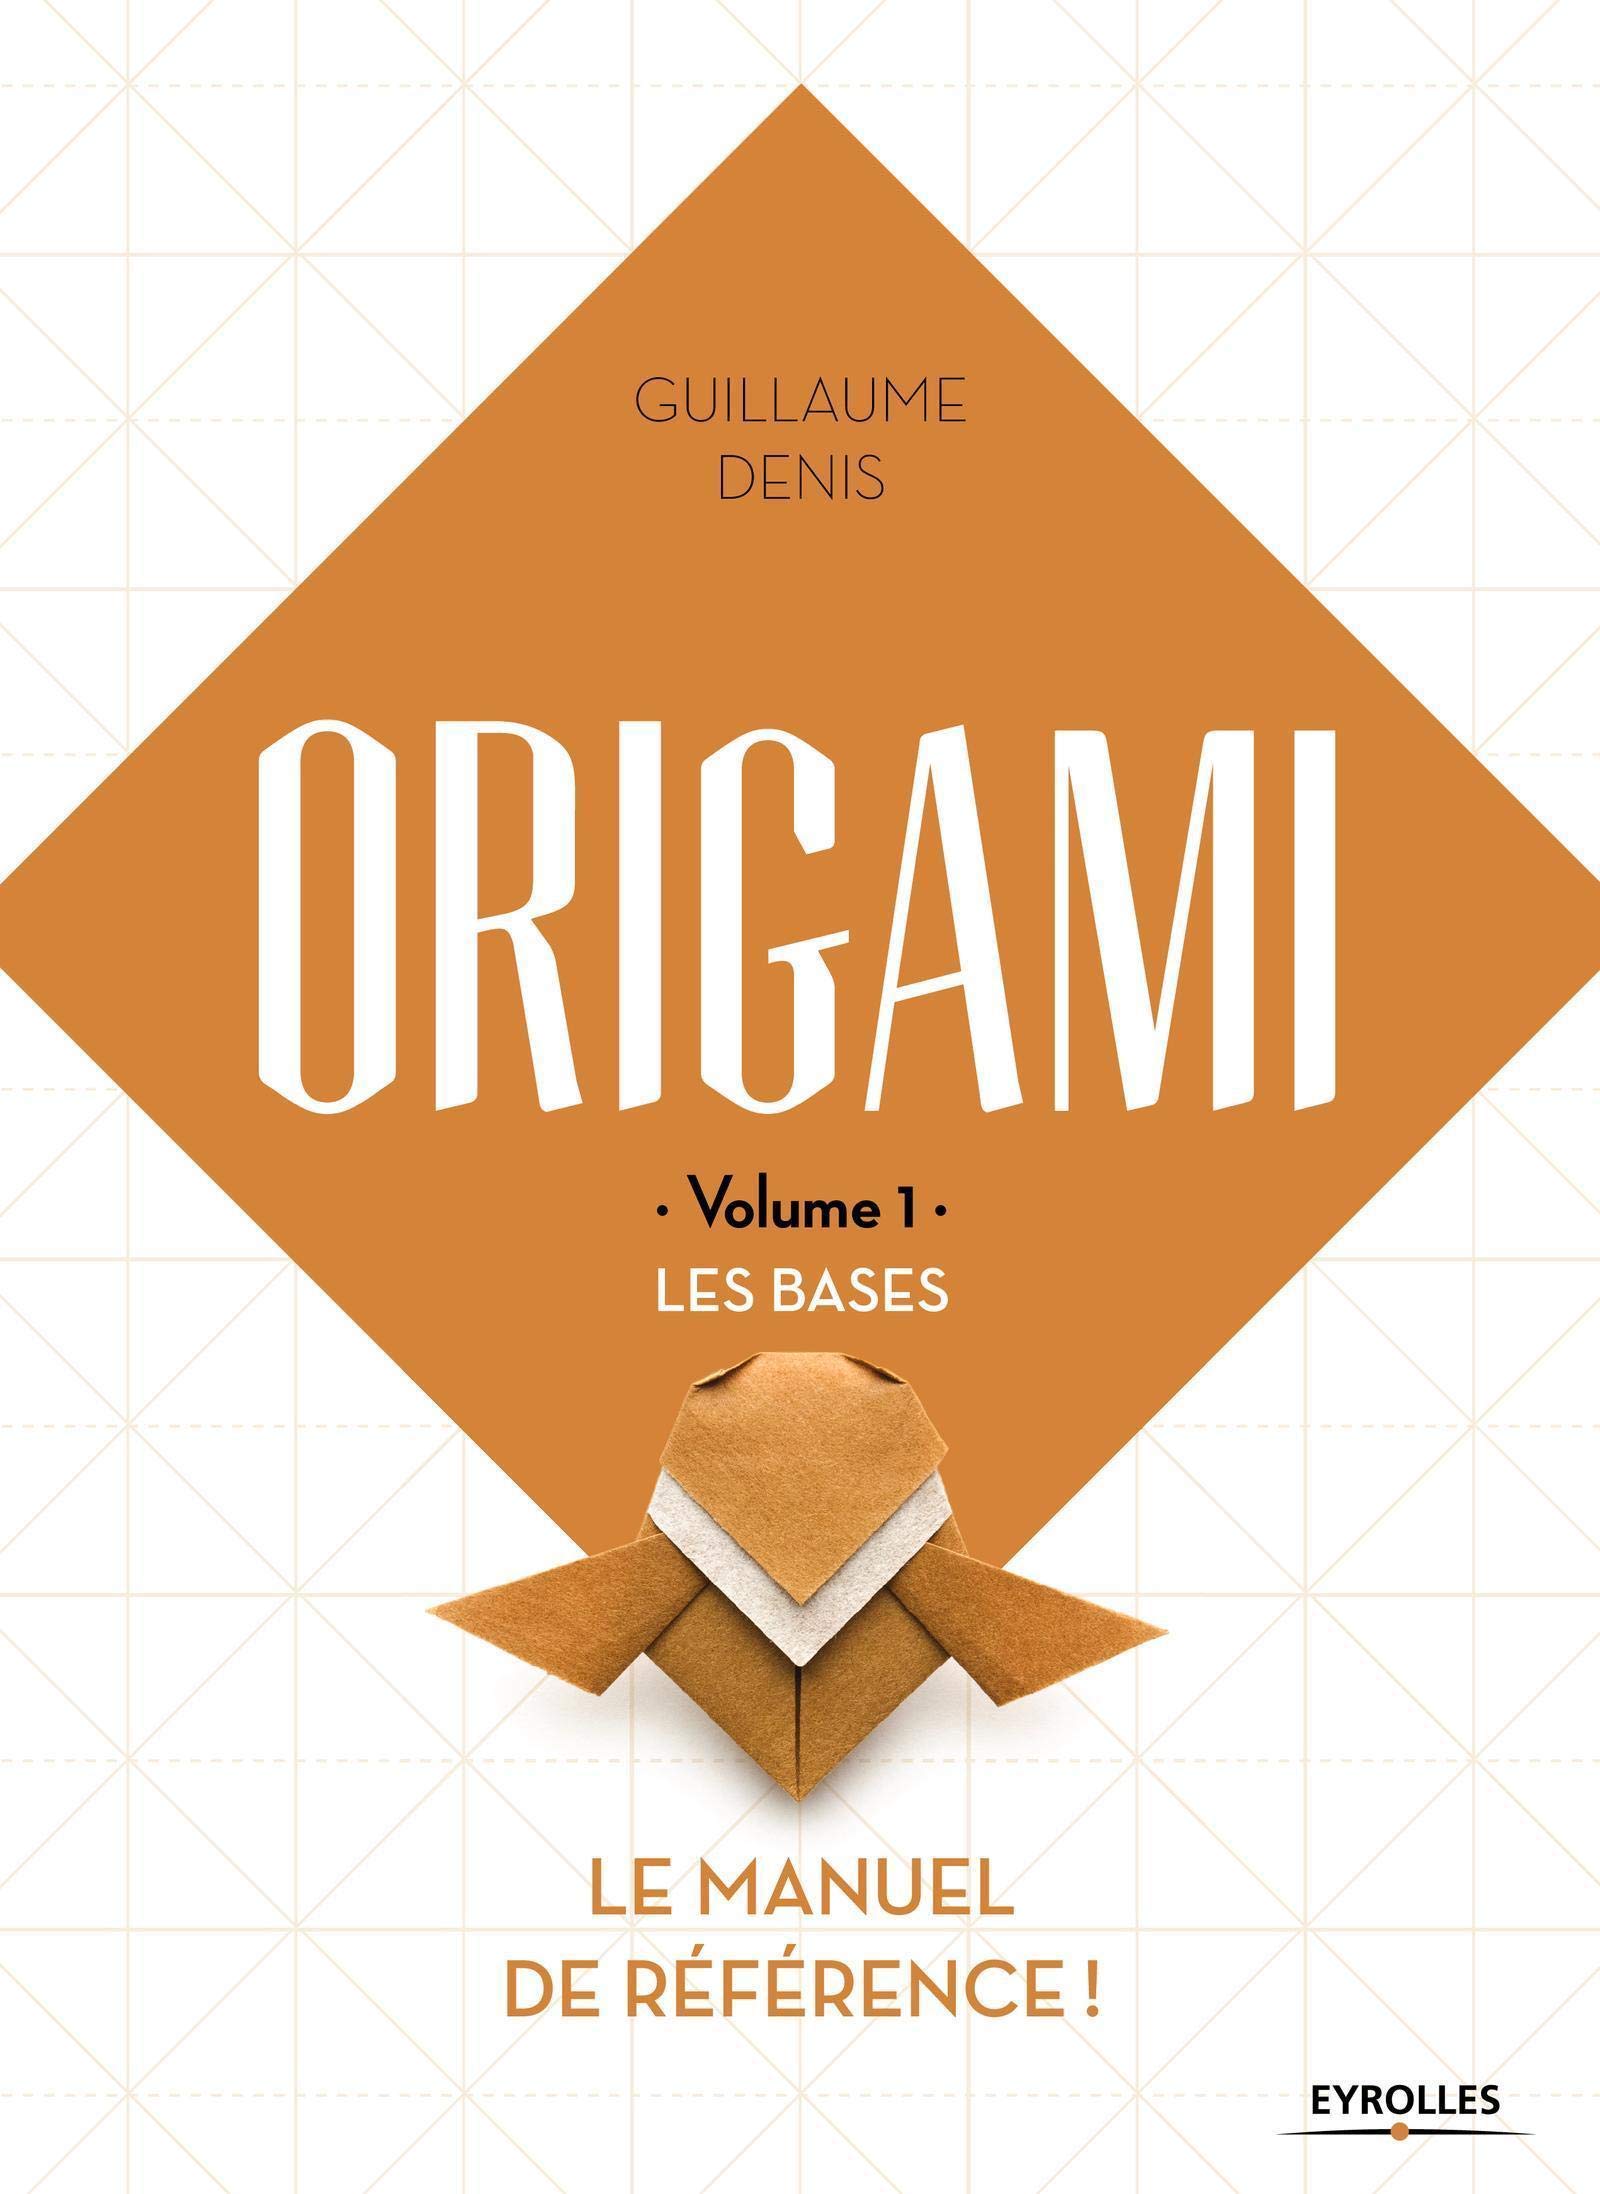 ORIGAMI - Volume 1 - LES BASES : page 234.